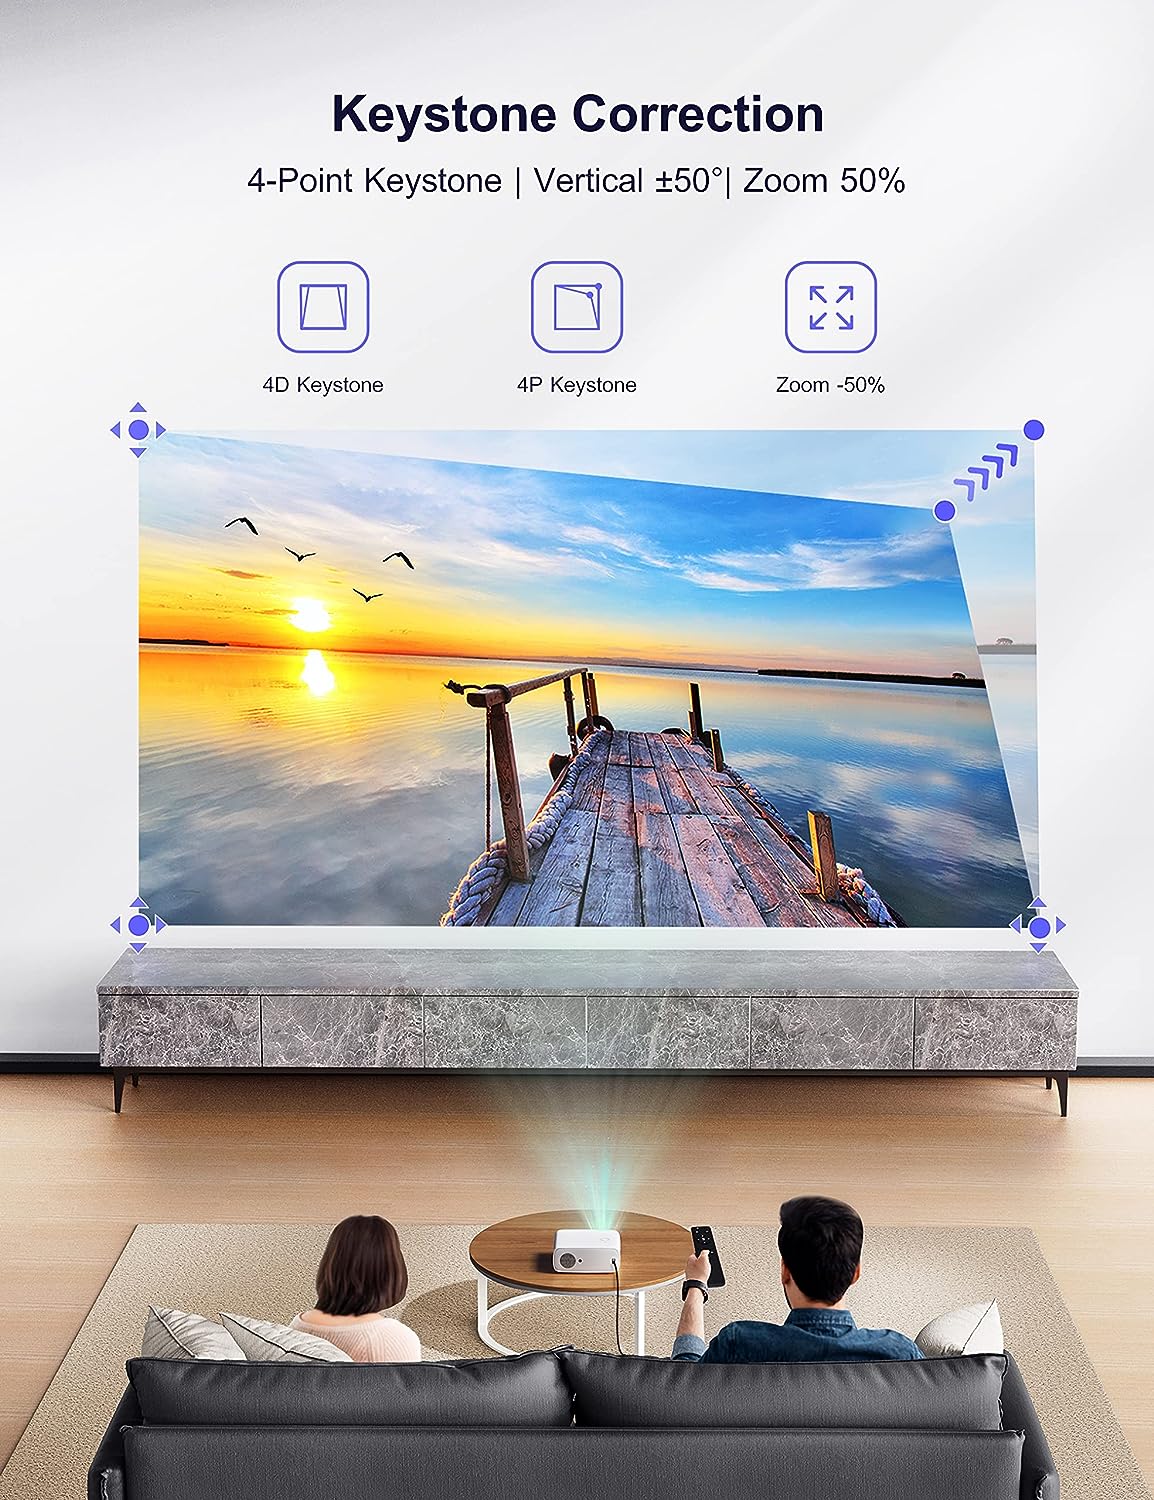 WiMiUS Home Projector P64 – WiMiUS Official